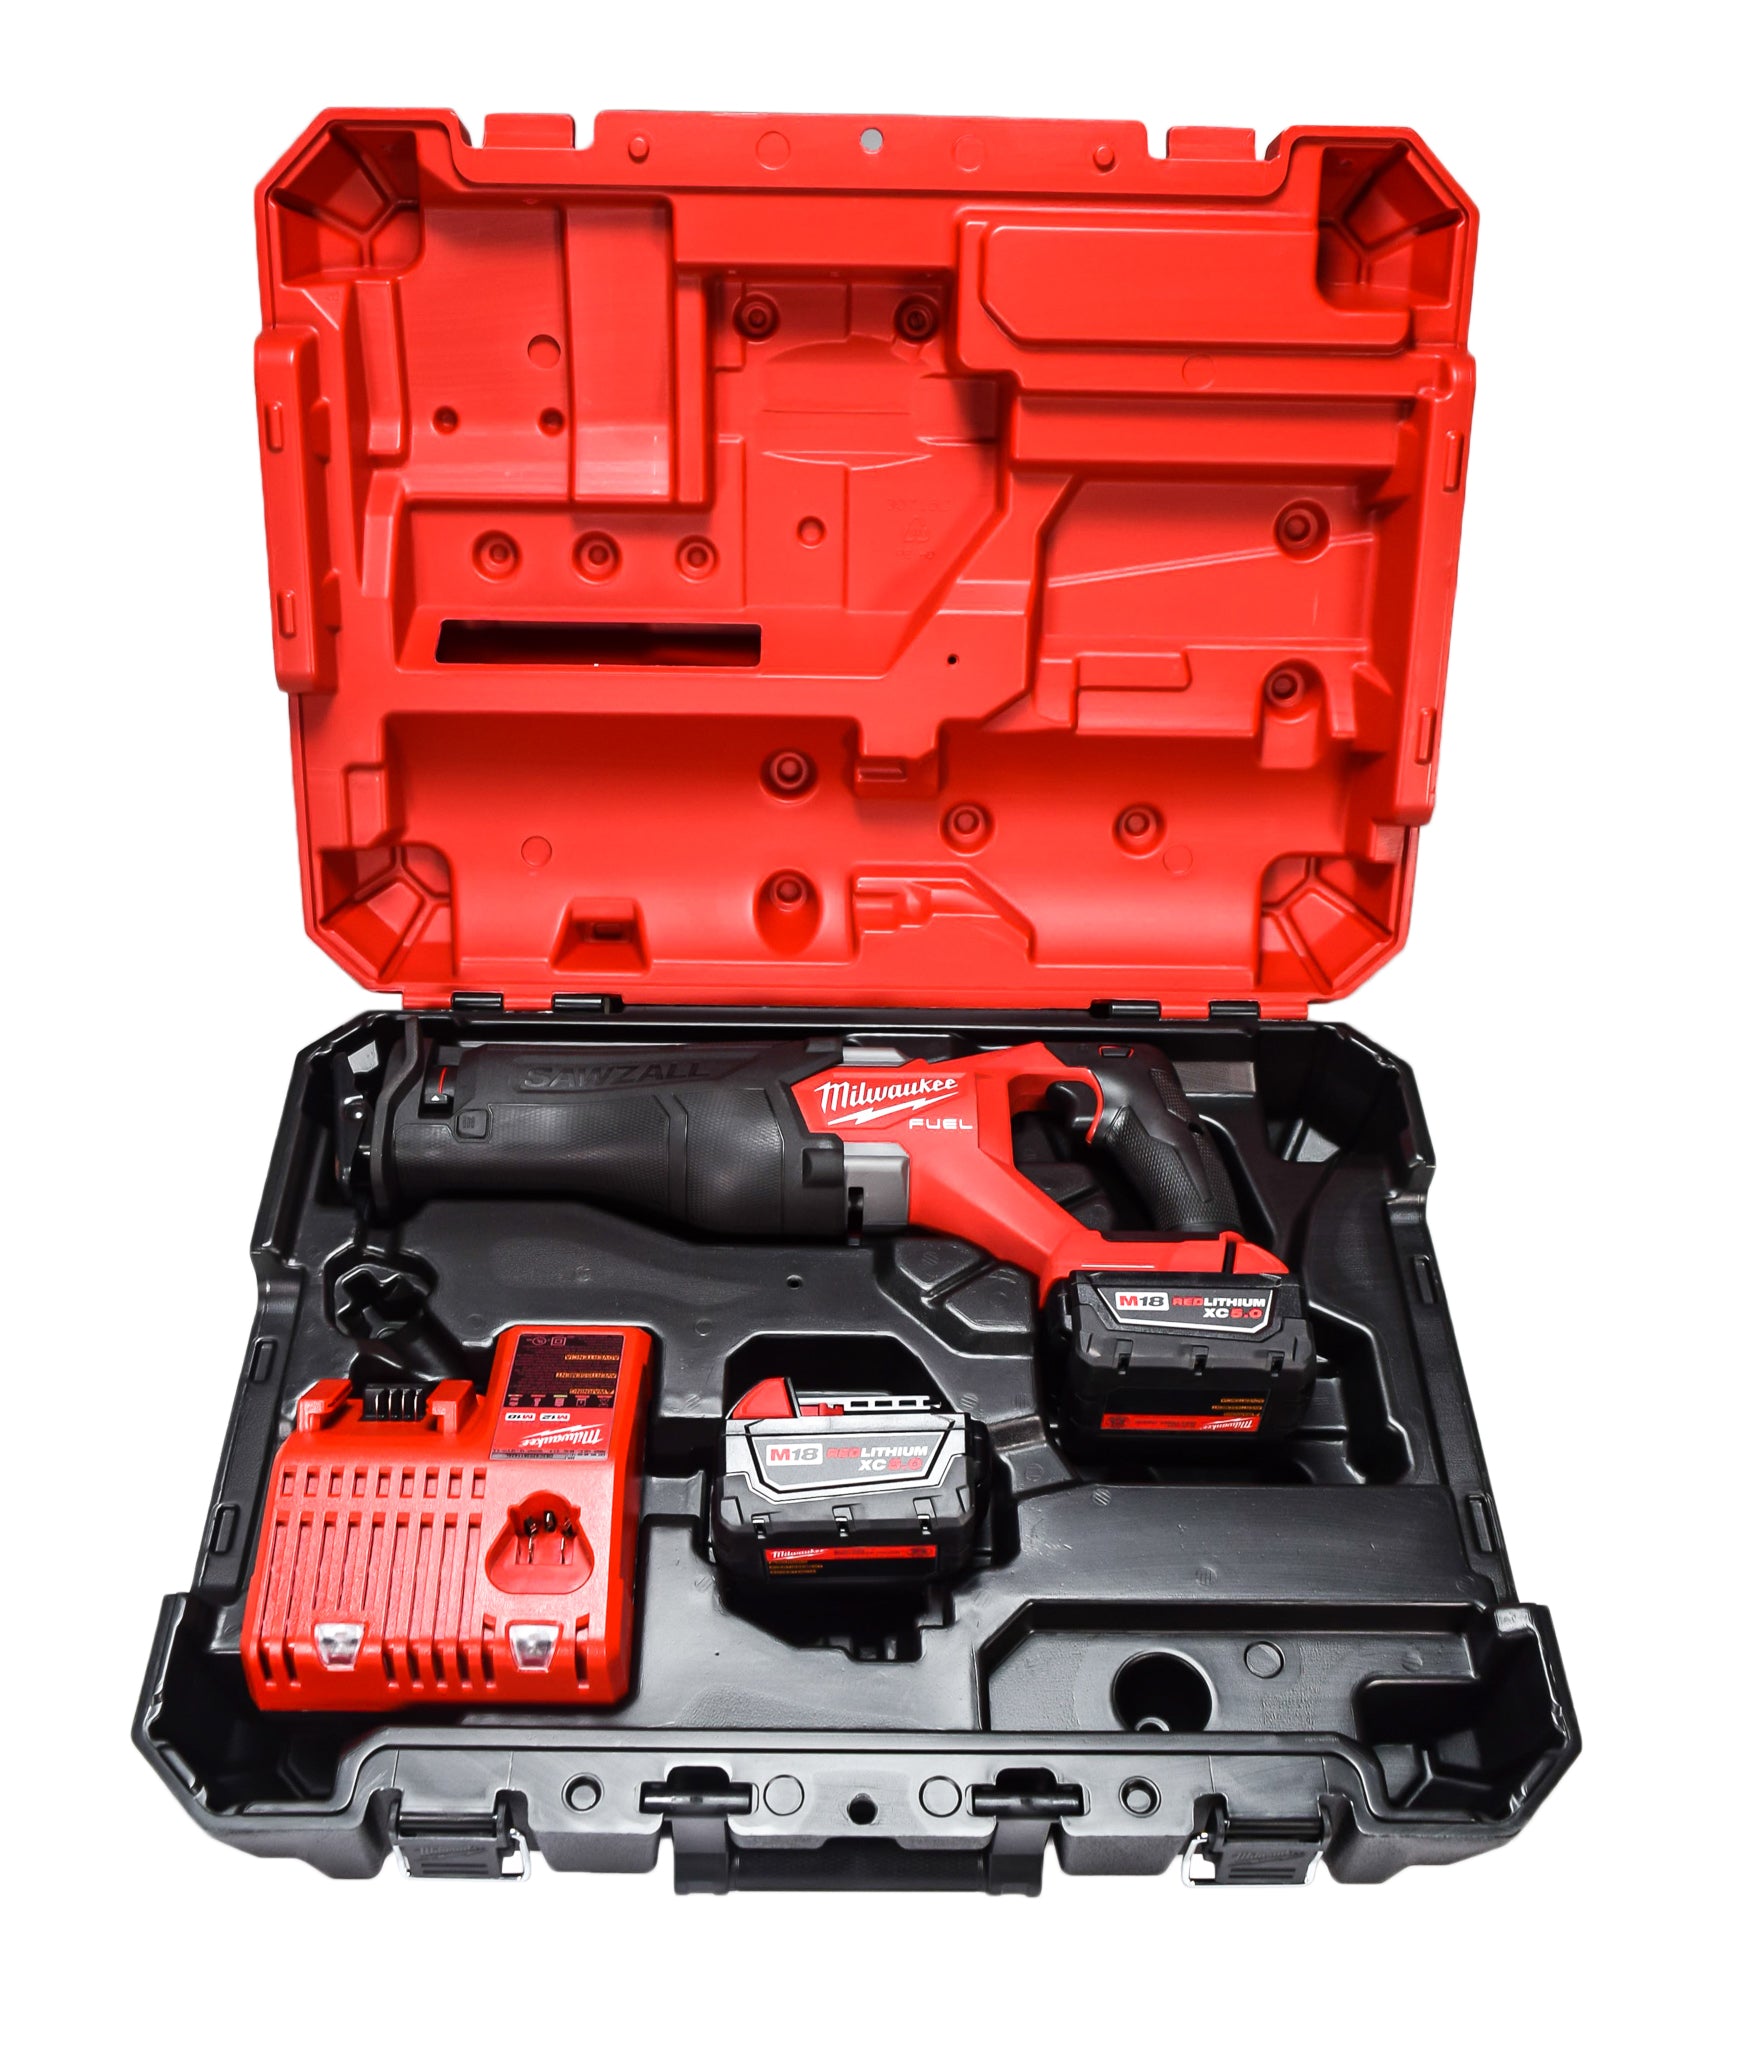 Milwaukee M18 FUEL 18-Volt Lithium-Ion Brushless Cordless Reciprocating Saw Kit W/two 5.0 Ah Batteries Charger & Hard Case 2821-22